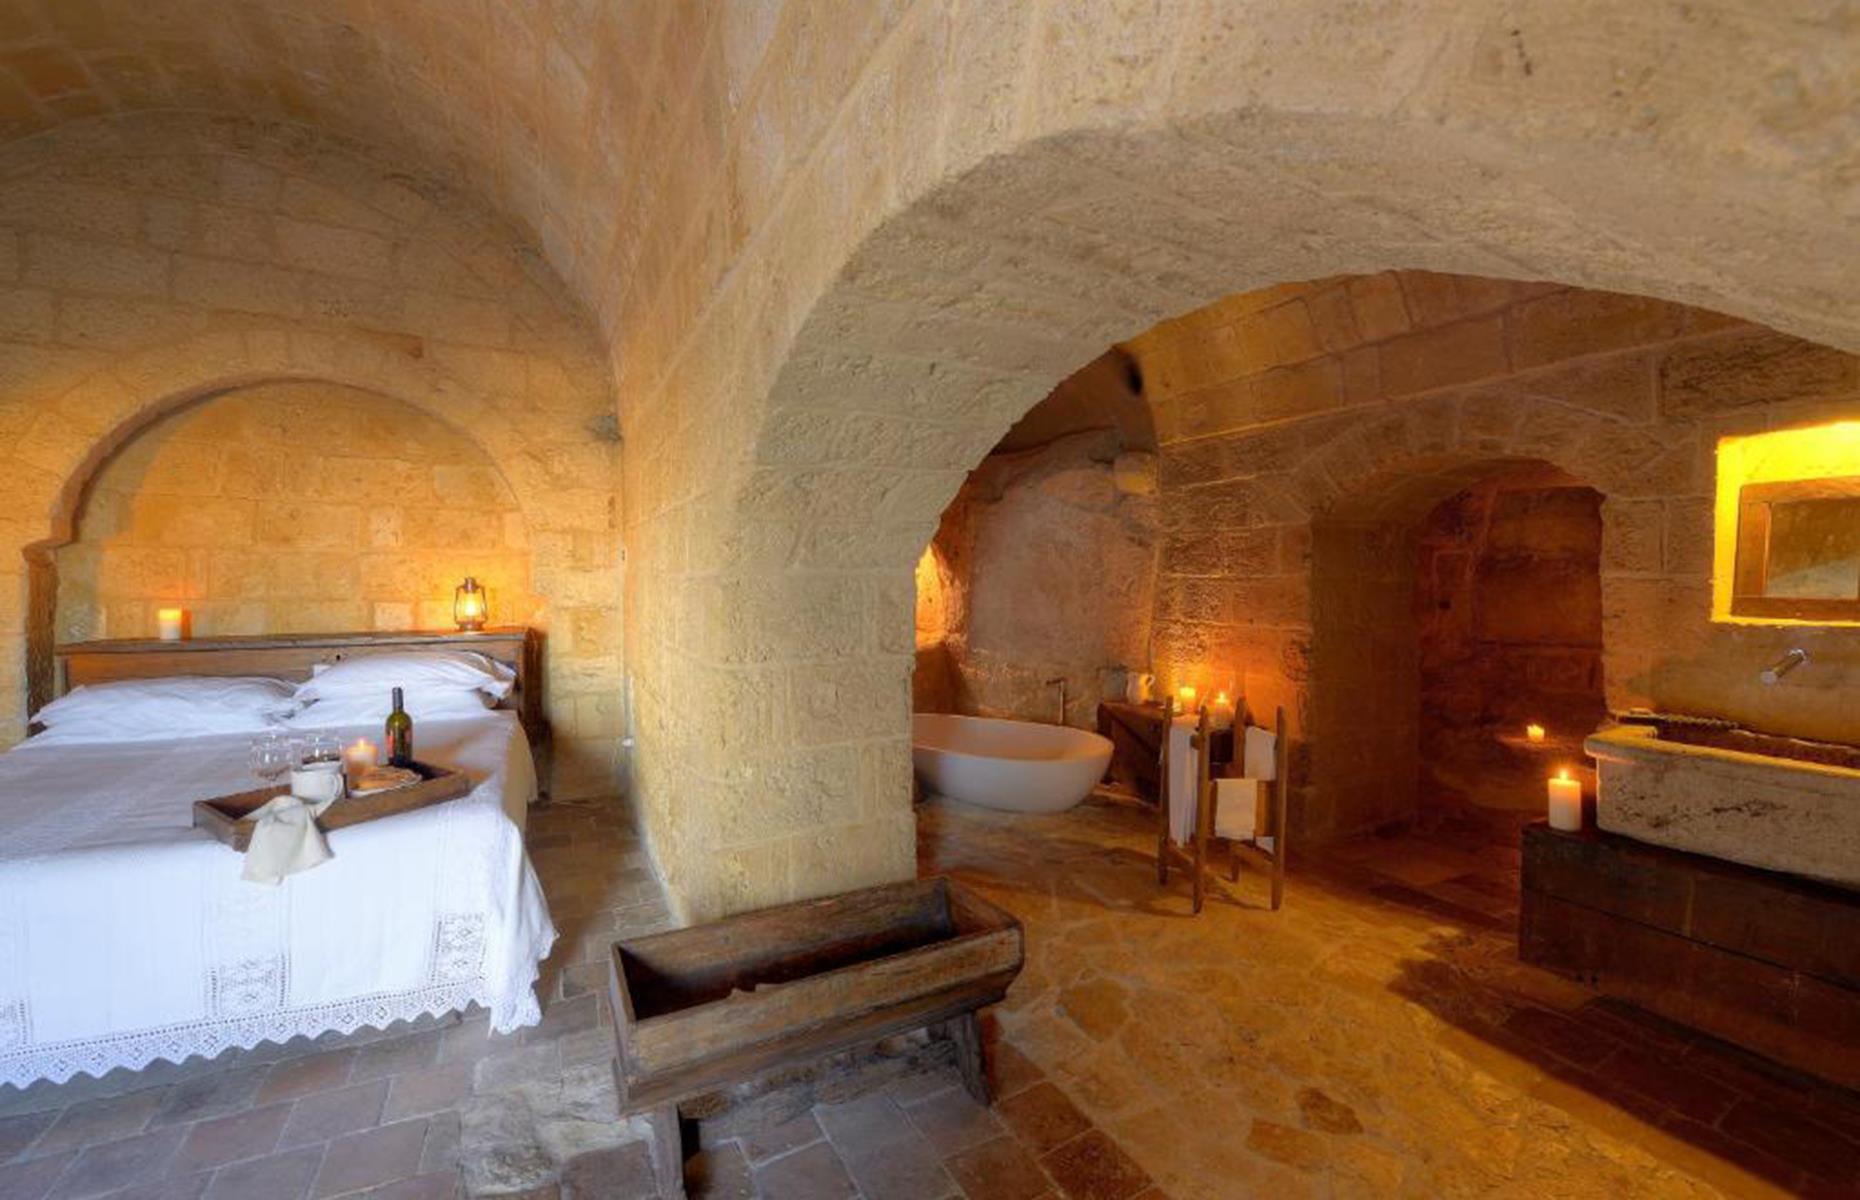 <p>Another Matera hotel, the stunning, candle-lit caves of Sextantio Le Grotte della Civita have been restored from abandoned ancient dwellings. A luxury retreat with a twist, the architecture retains its original shape and materials, but now comes with trappings of modern luxury like cozy king beds, bathtubs, and hand-woven sheets. The rooms are set in the oldest parts of the complex, while a former church is now a restaurant perfect for romantic dinners. You can even join a cooking course to learn the art of pasta making – including how to make regional shapes like cavatelli and orecchiette.</p>